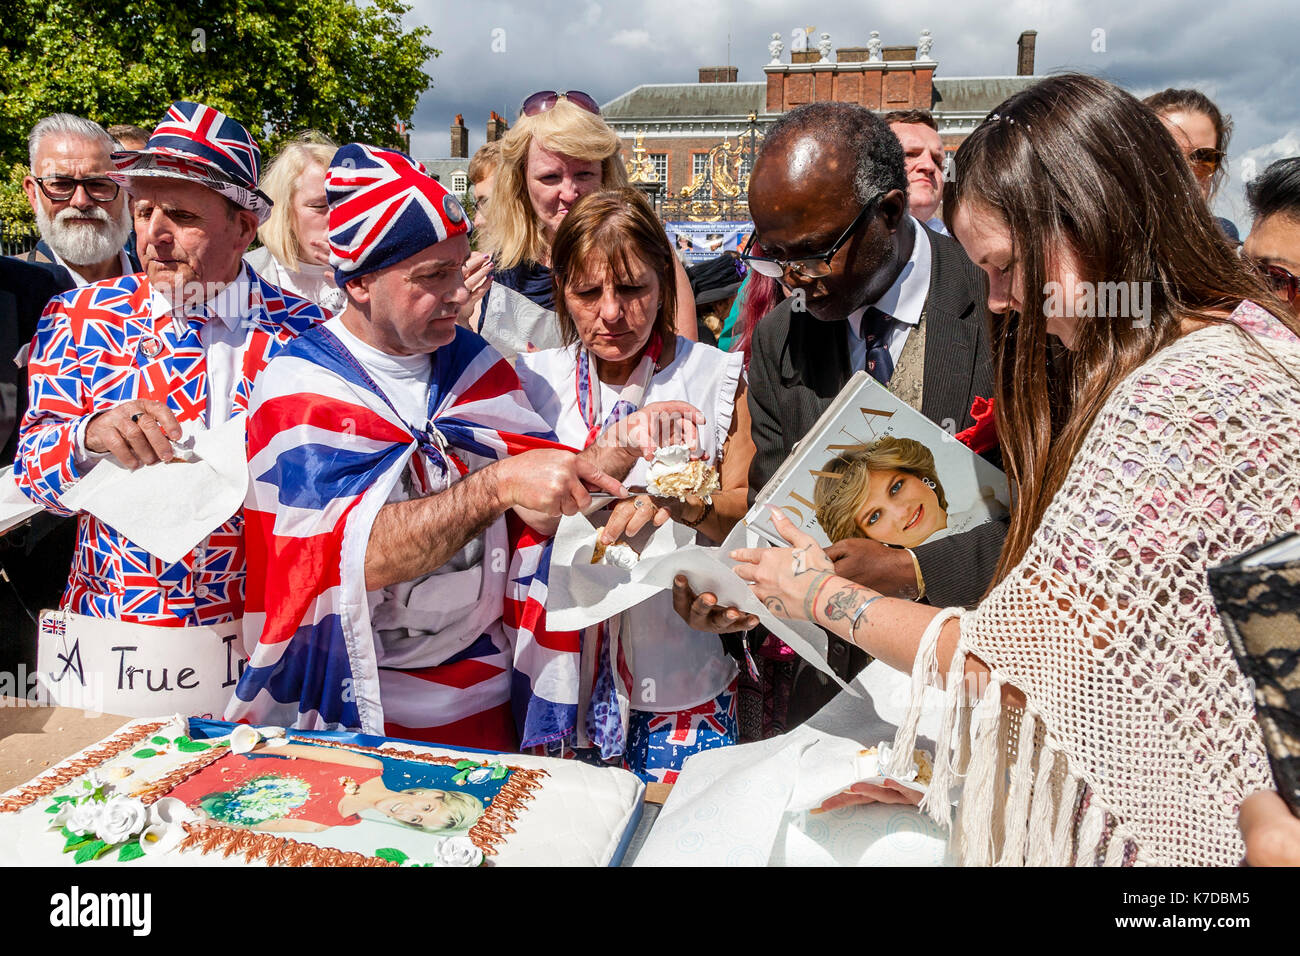 Supporters Of The Late Princess Diana Cutting A Large Cake In Memory Of Her On The 20th Anniversary Of Her Death, Kensington Palace, London, UK Stock Photo